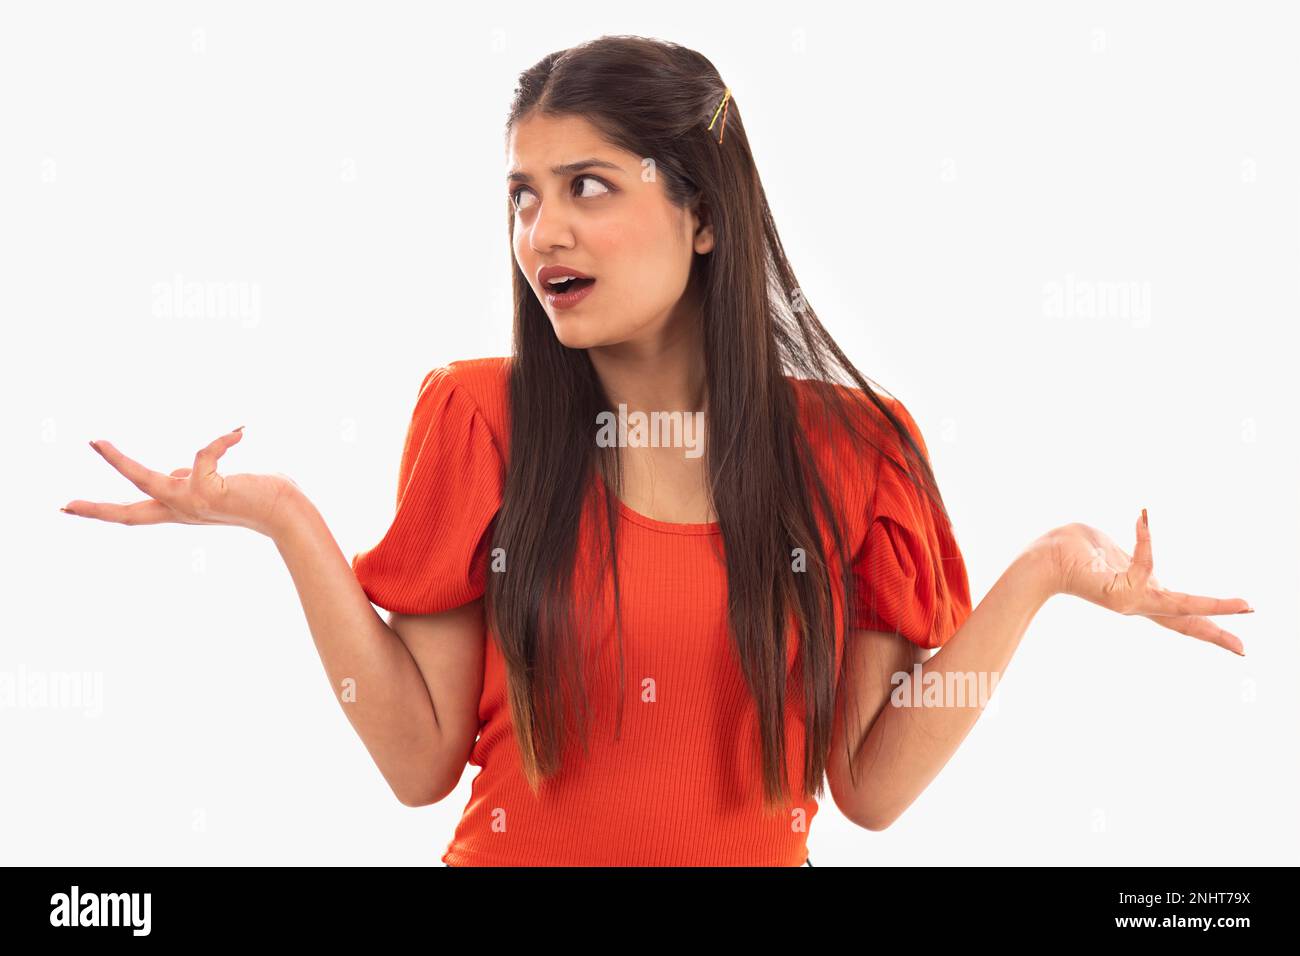 Portrait of beautiful woman shrugging against white background Stock Photo